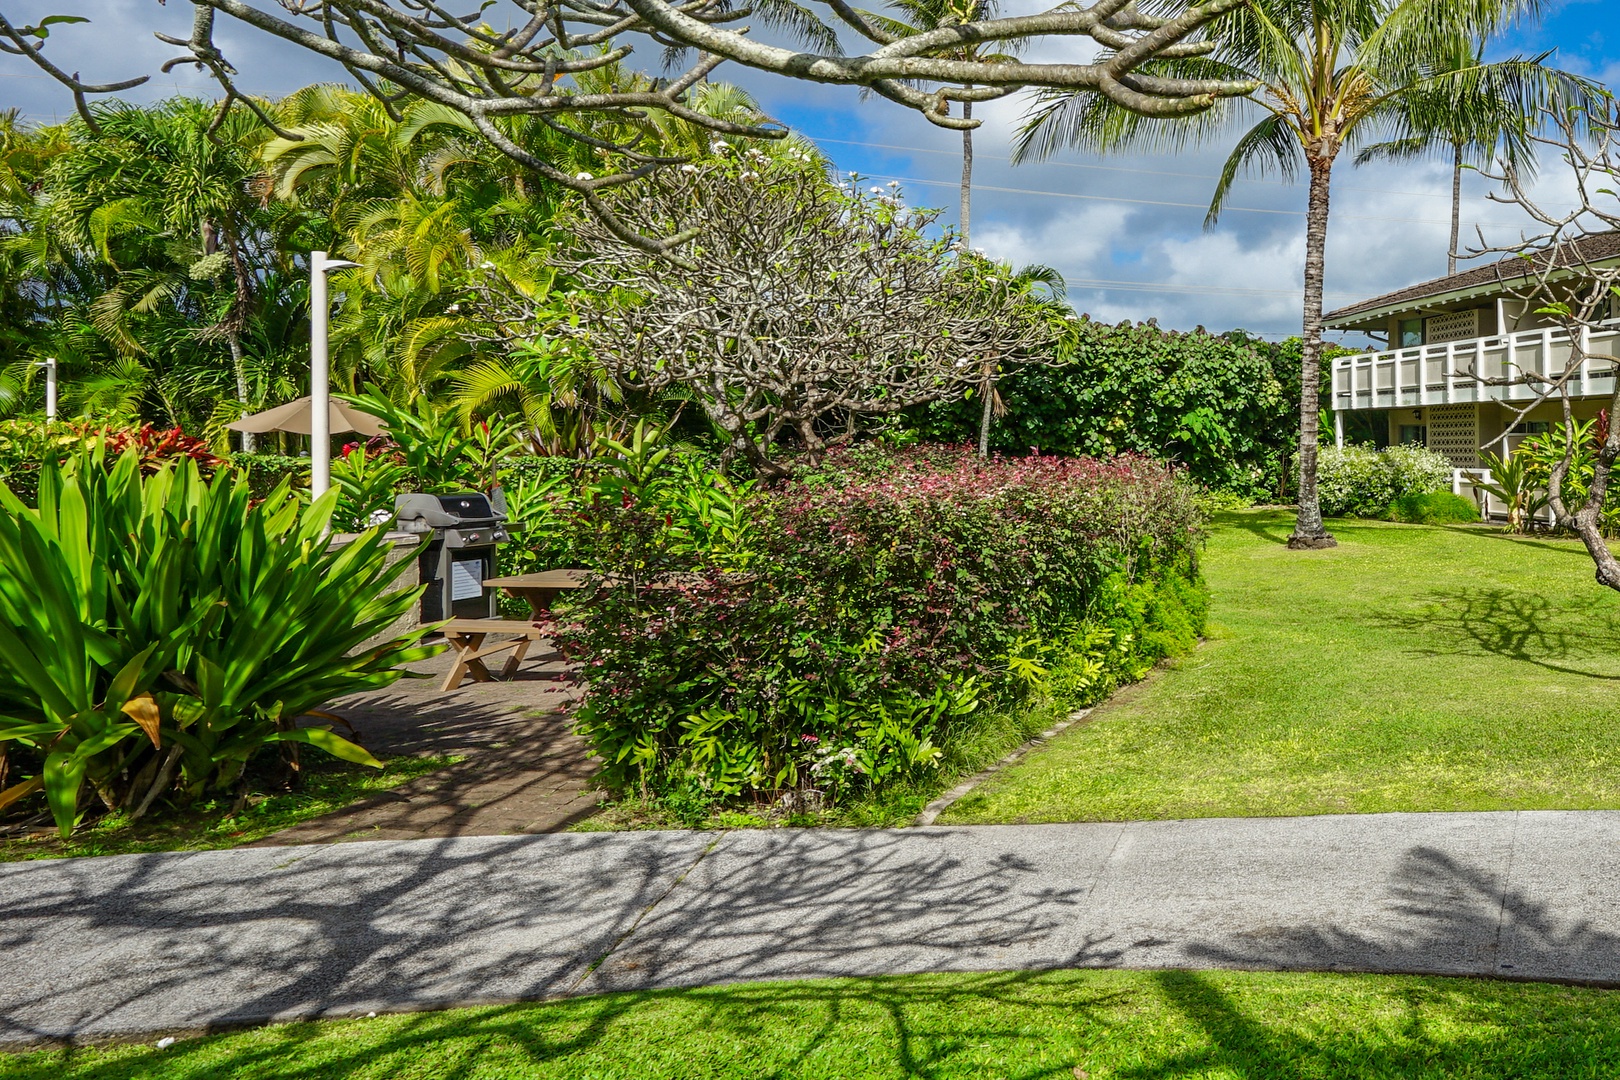 Kapaa Vacation Rentals, Nani Hale - Natural landscaping for a stroll